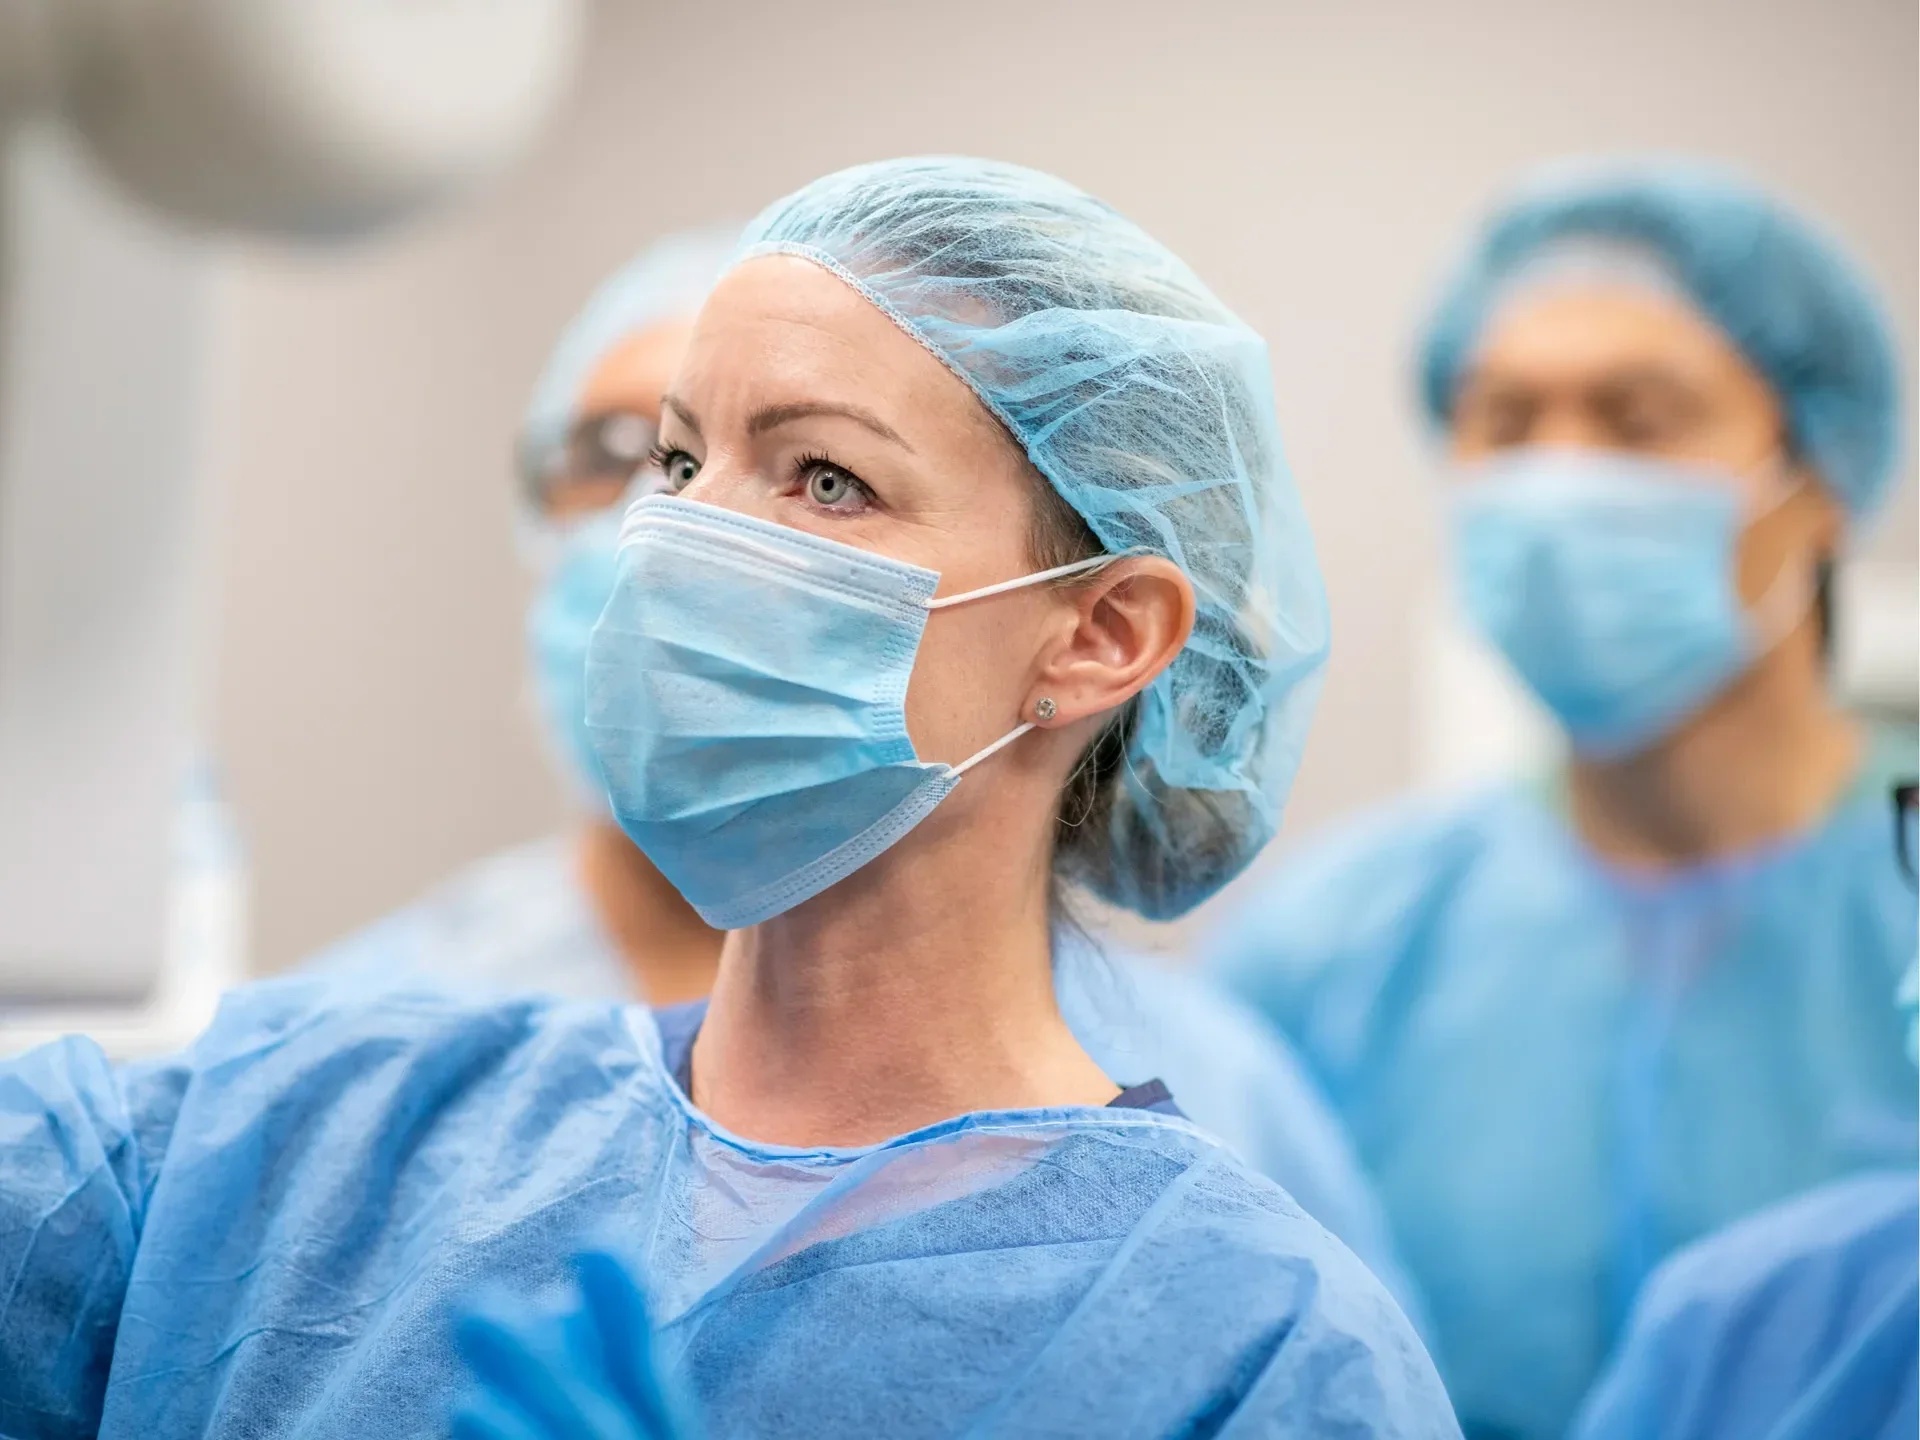 Group of doctors in surgical gowns and masks